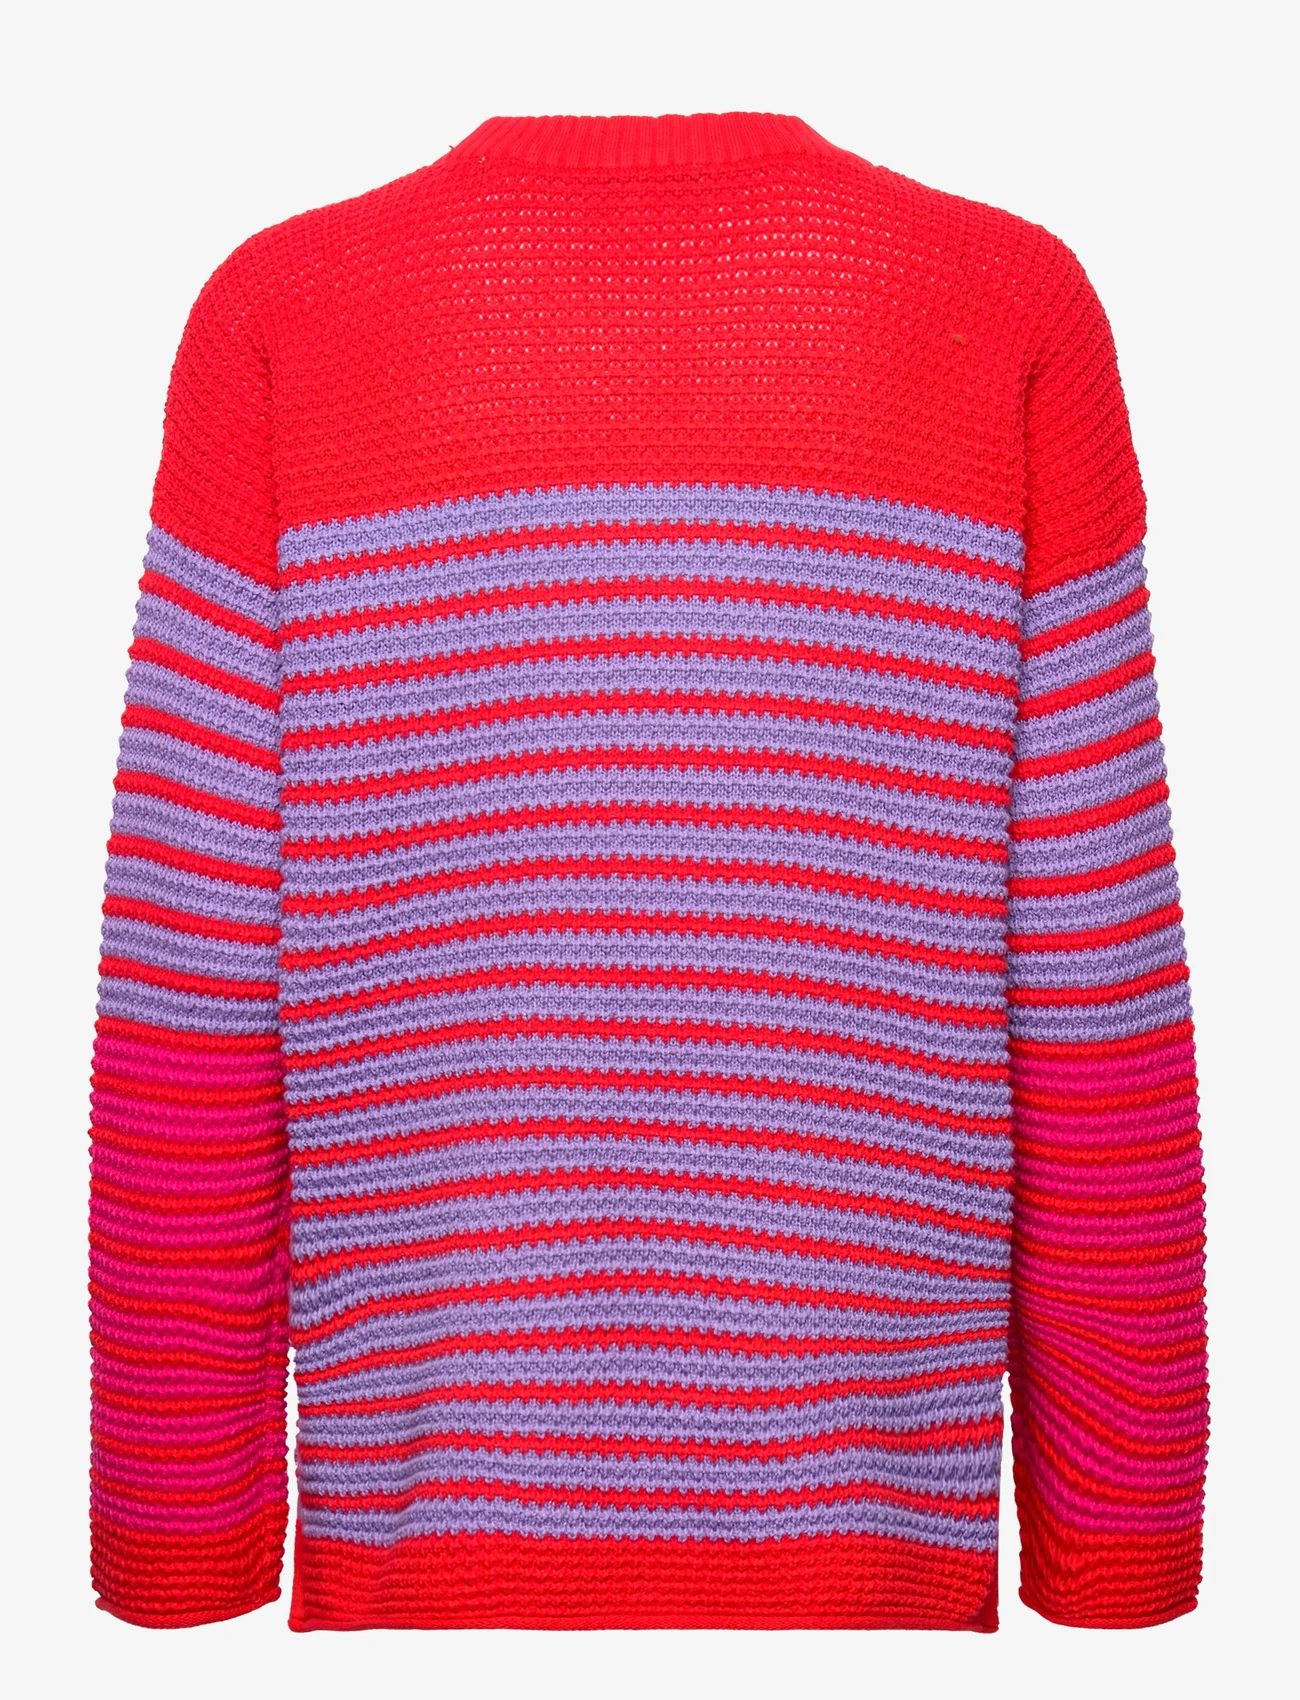 Esprit Casual - Textured knitted jumper - pullover - red 4 - 1